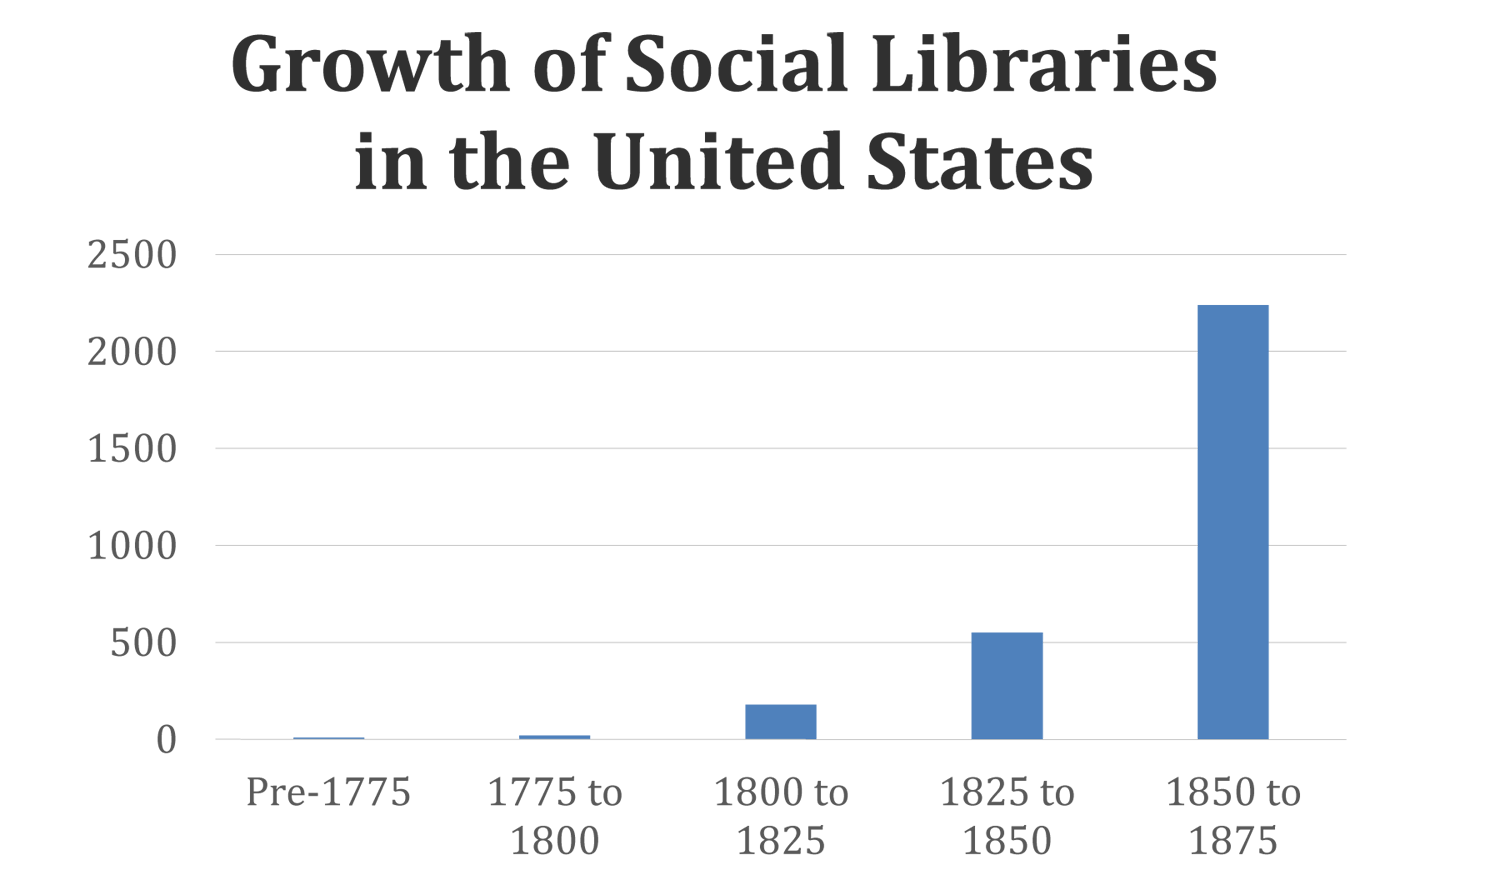 Growth of Social Libraries in the United States